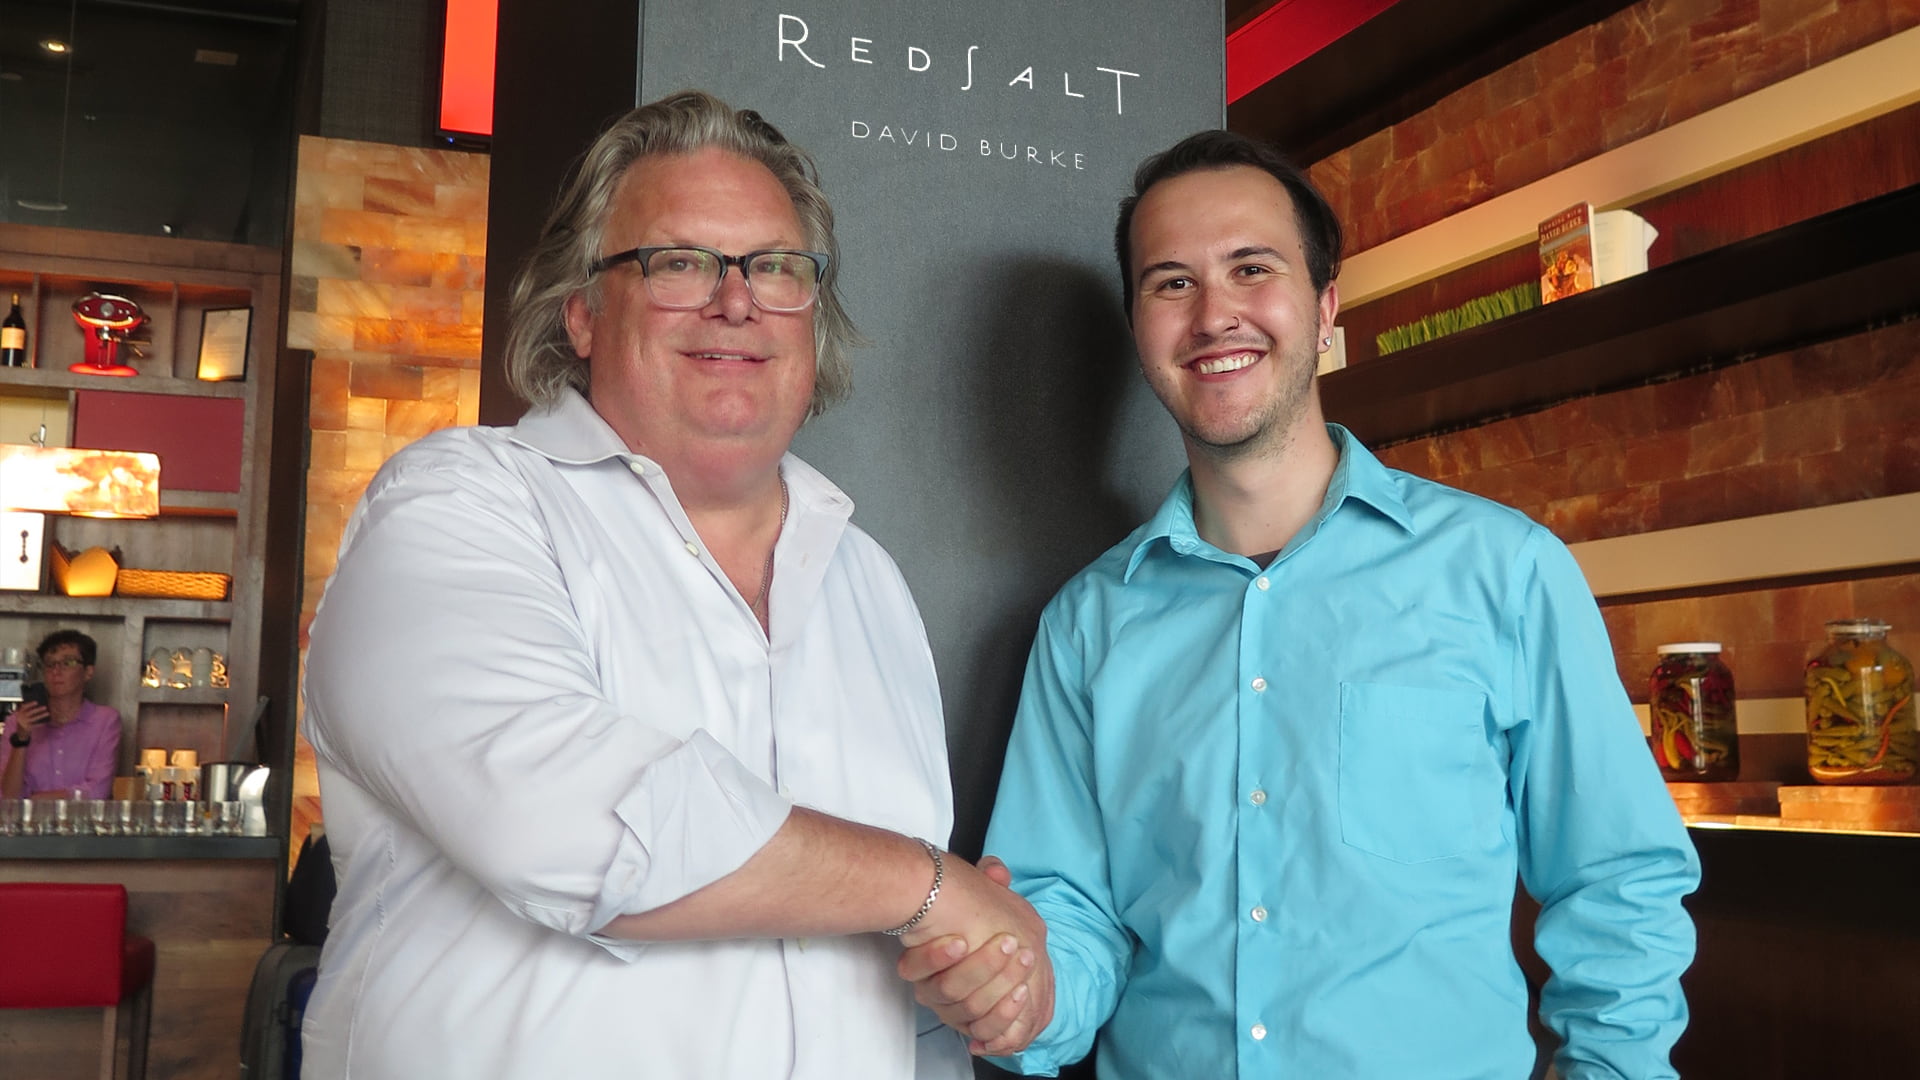 Chef David Burke with Burke Fellow Sean Murphy '21 at Red Salt in Charlotte.